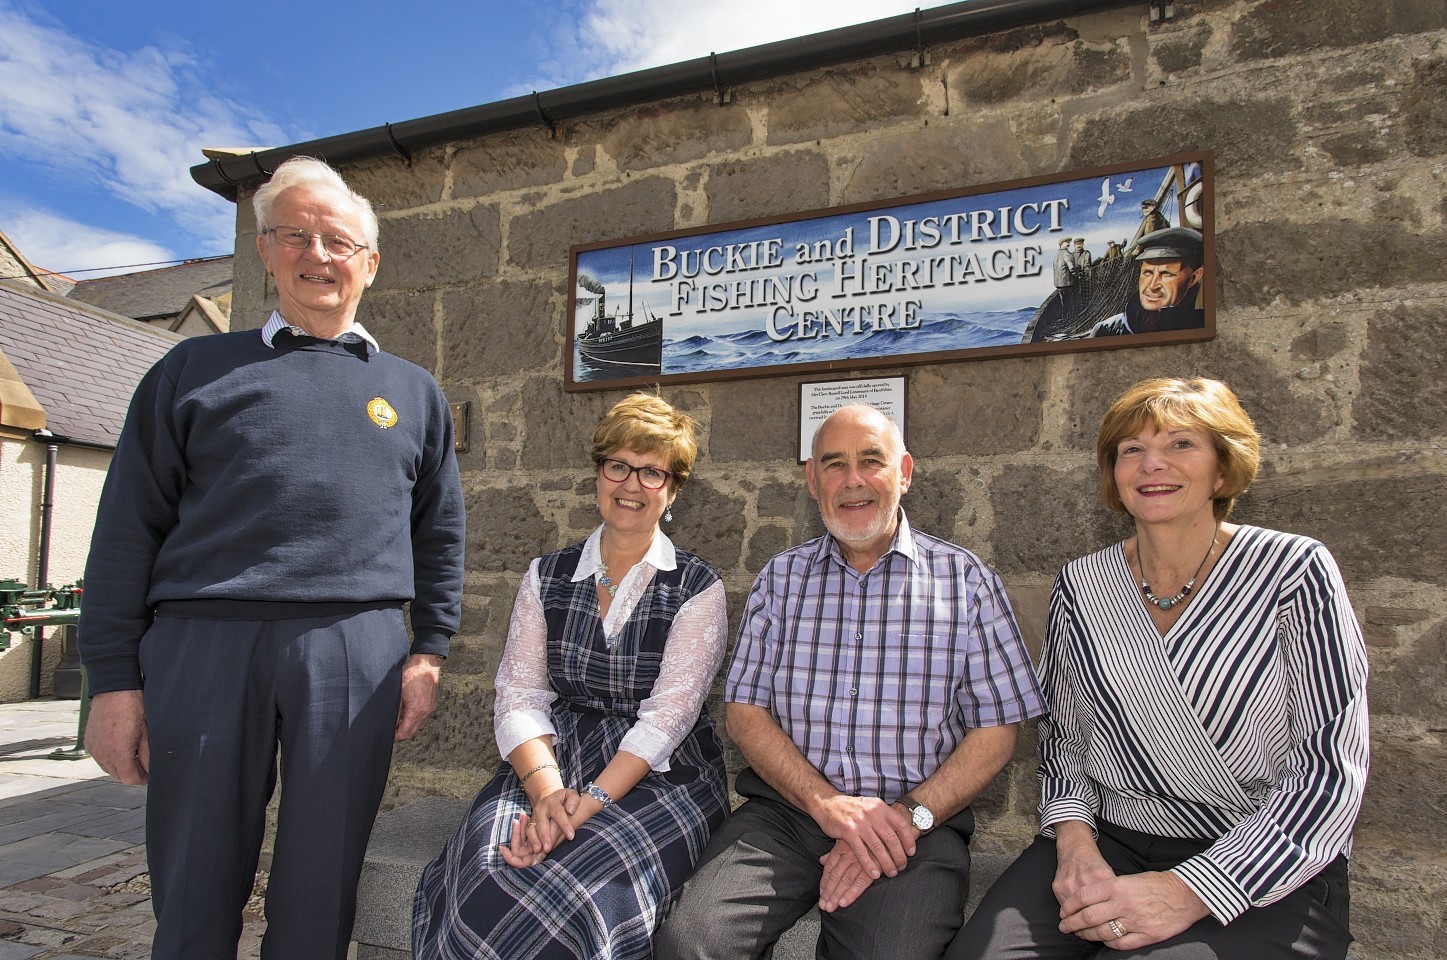 Buckie and District Fishing Heritage Centre